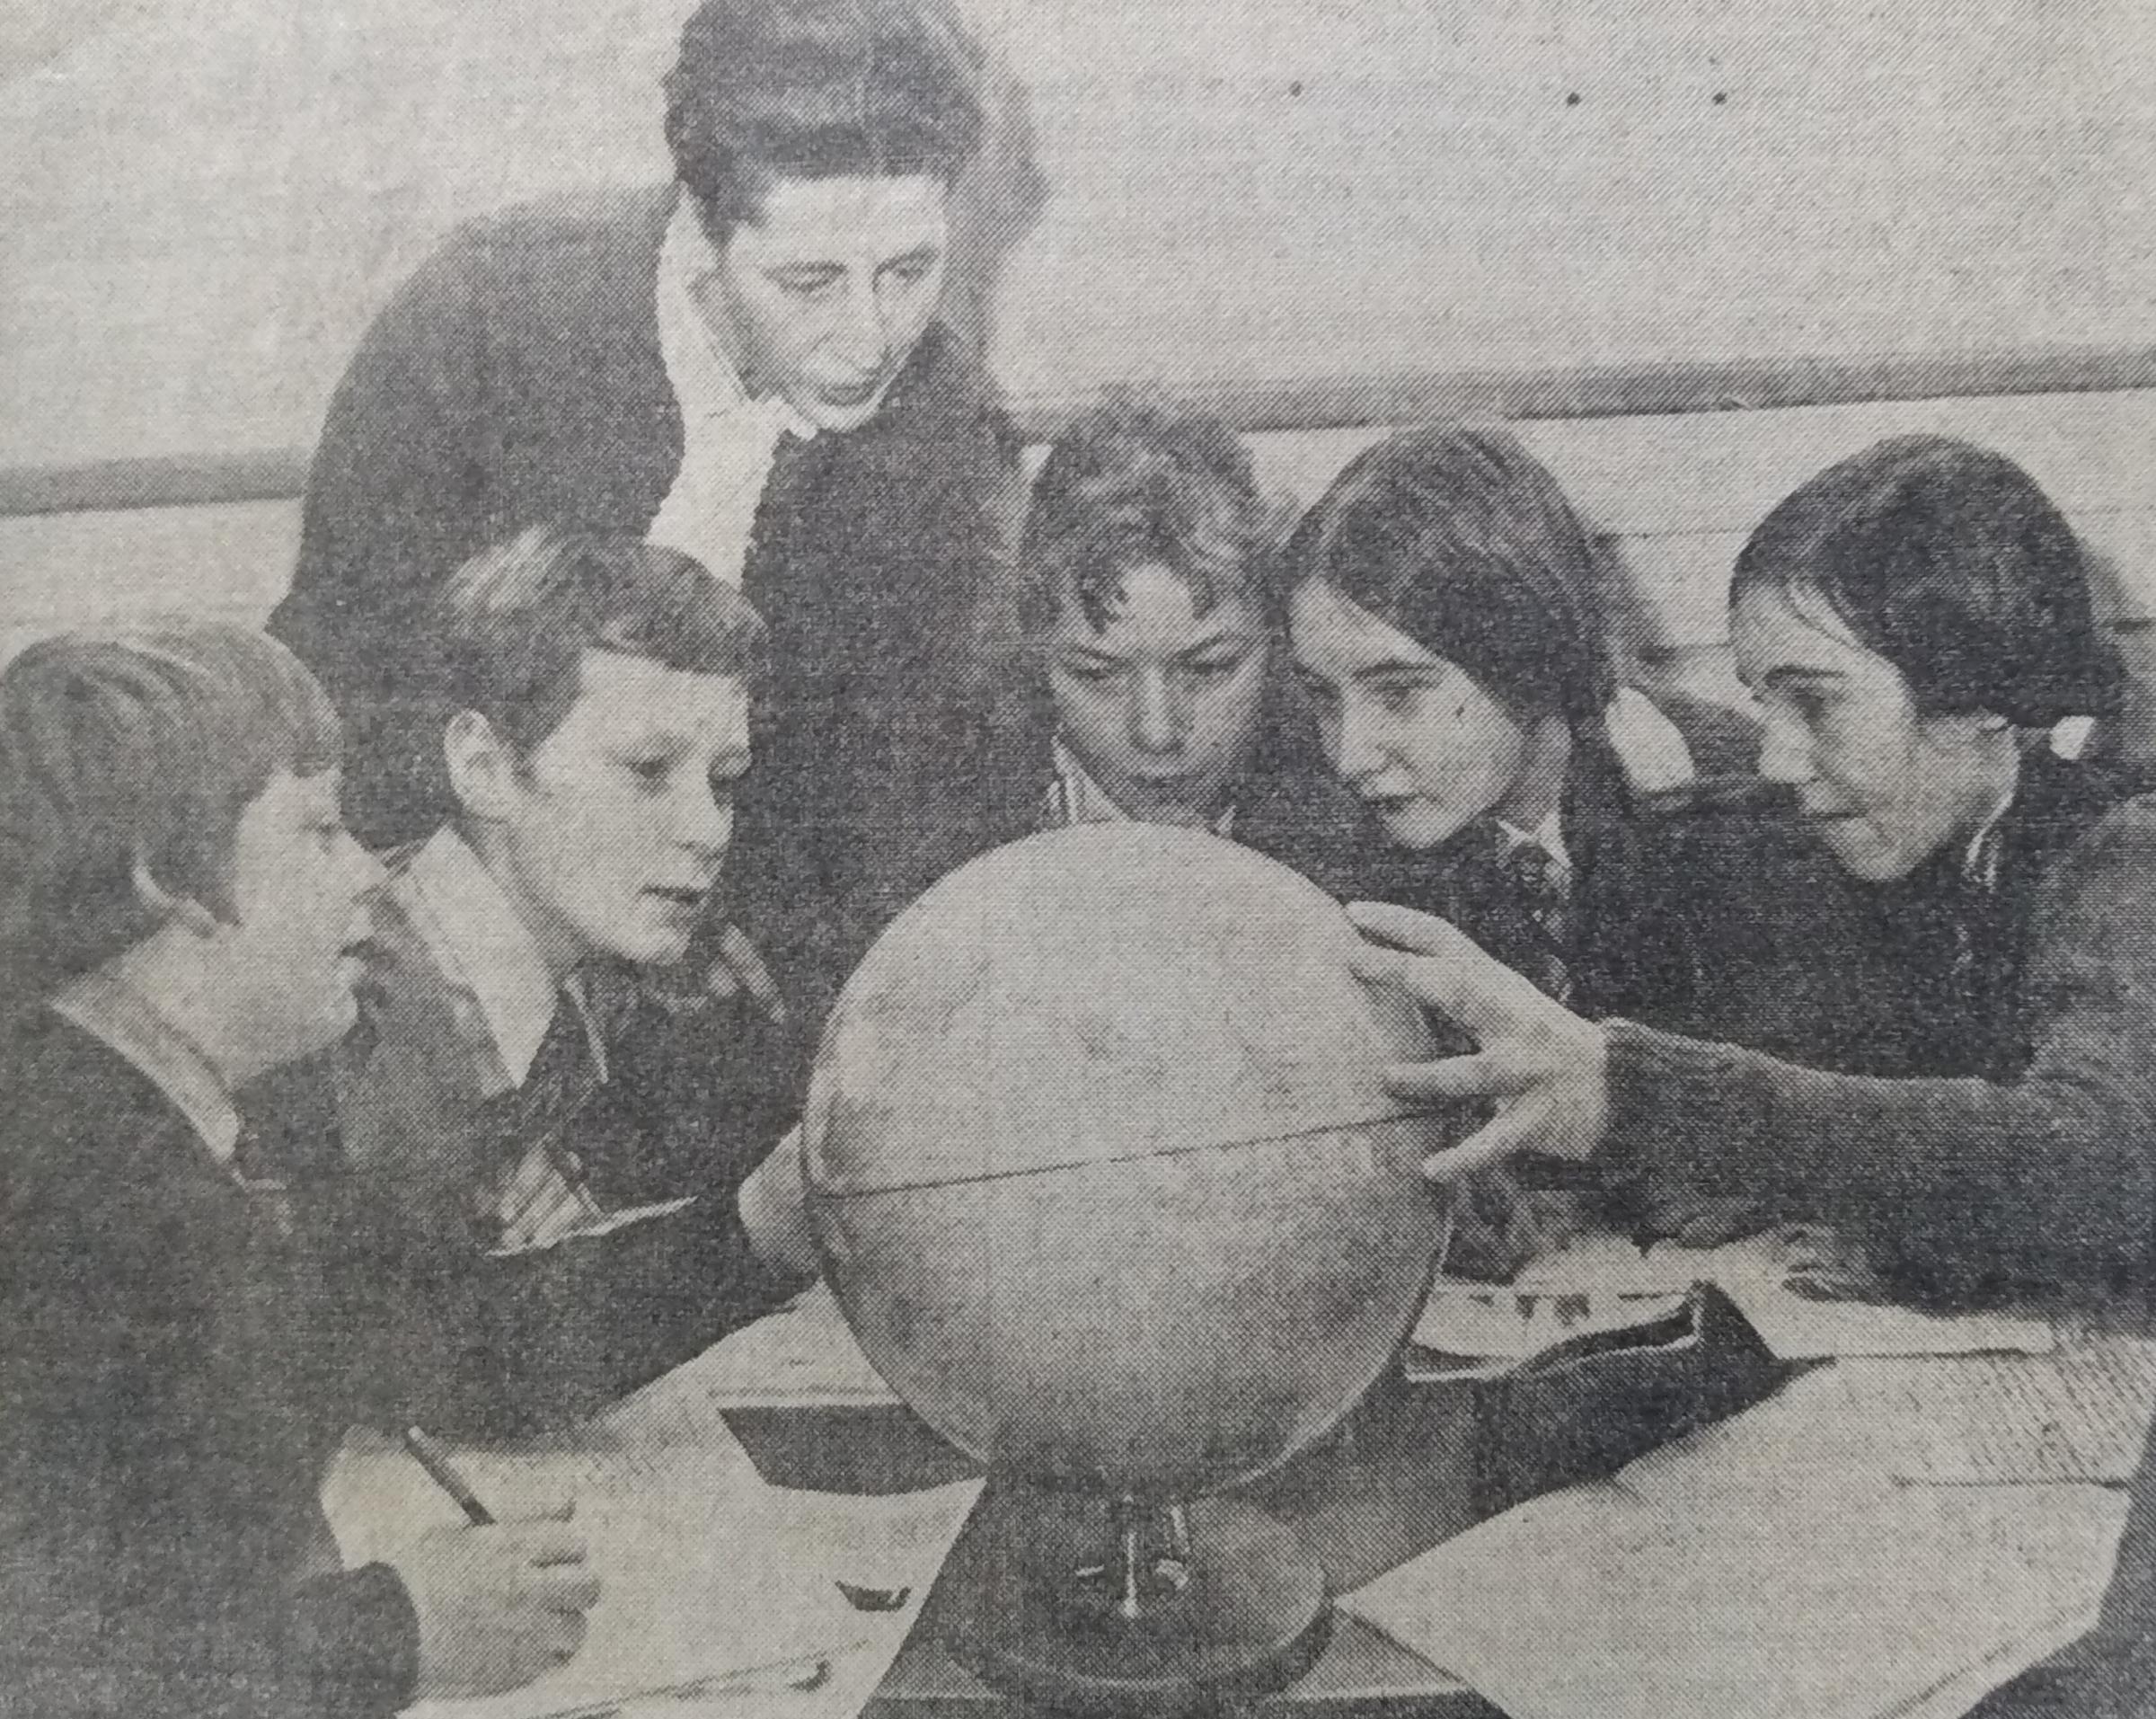 Back to the 1960s for this picture, where a group of pupils go globetrotting